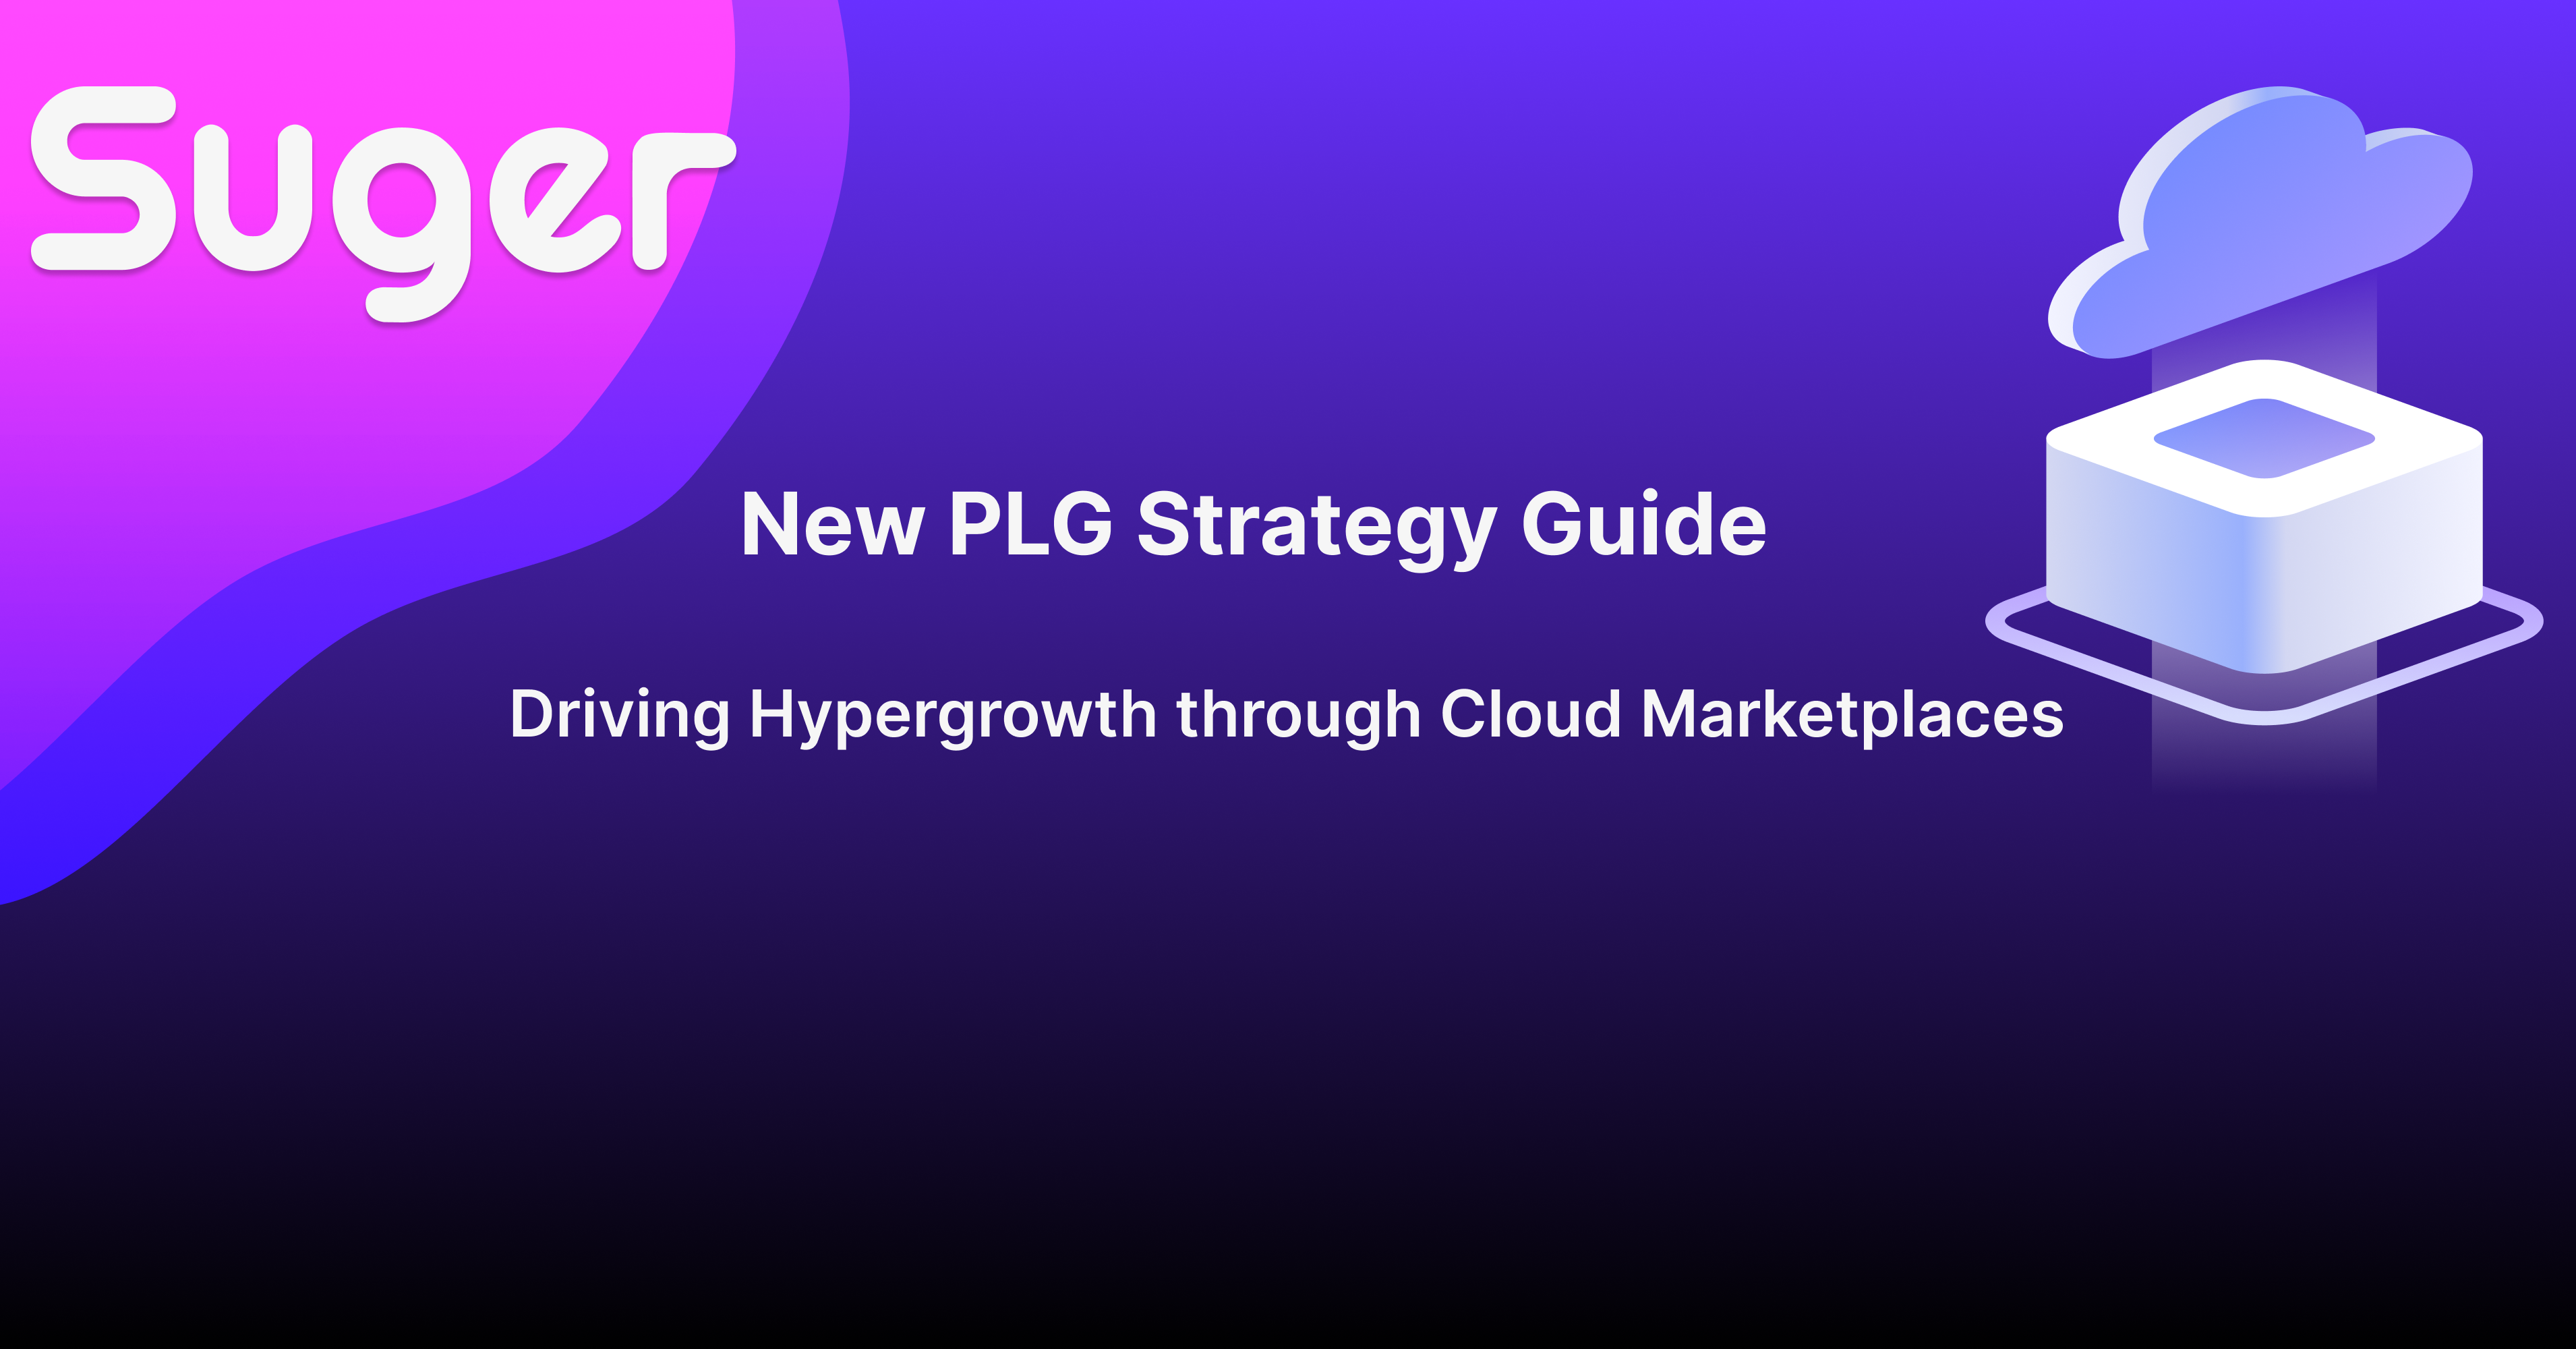 New PLG Strategy Guide | Driving Hypergrowth through Cloud Marketplaces